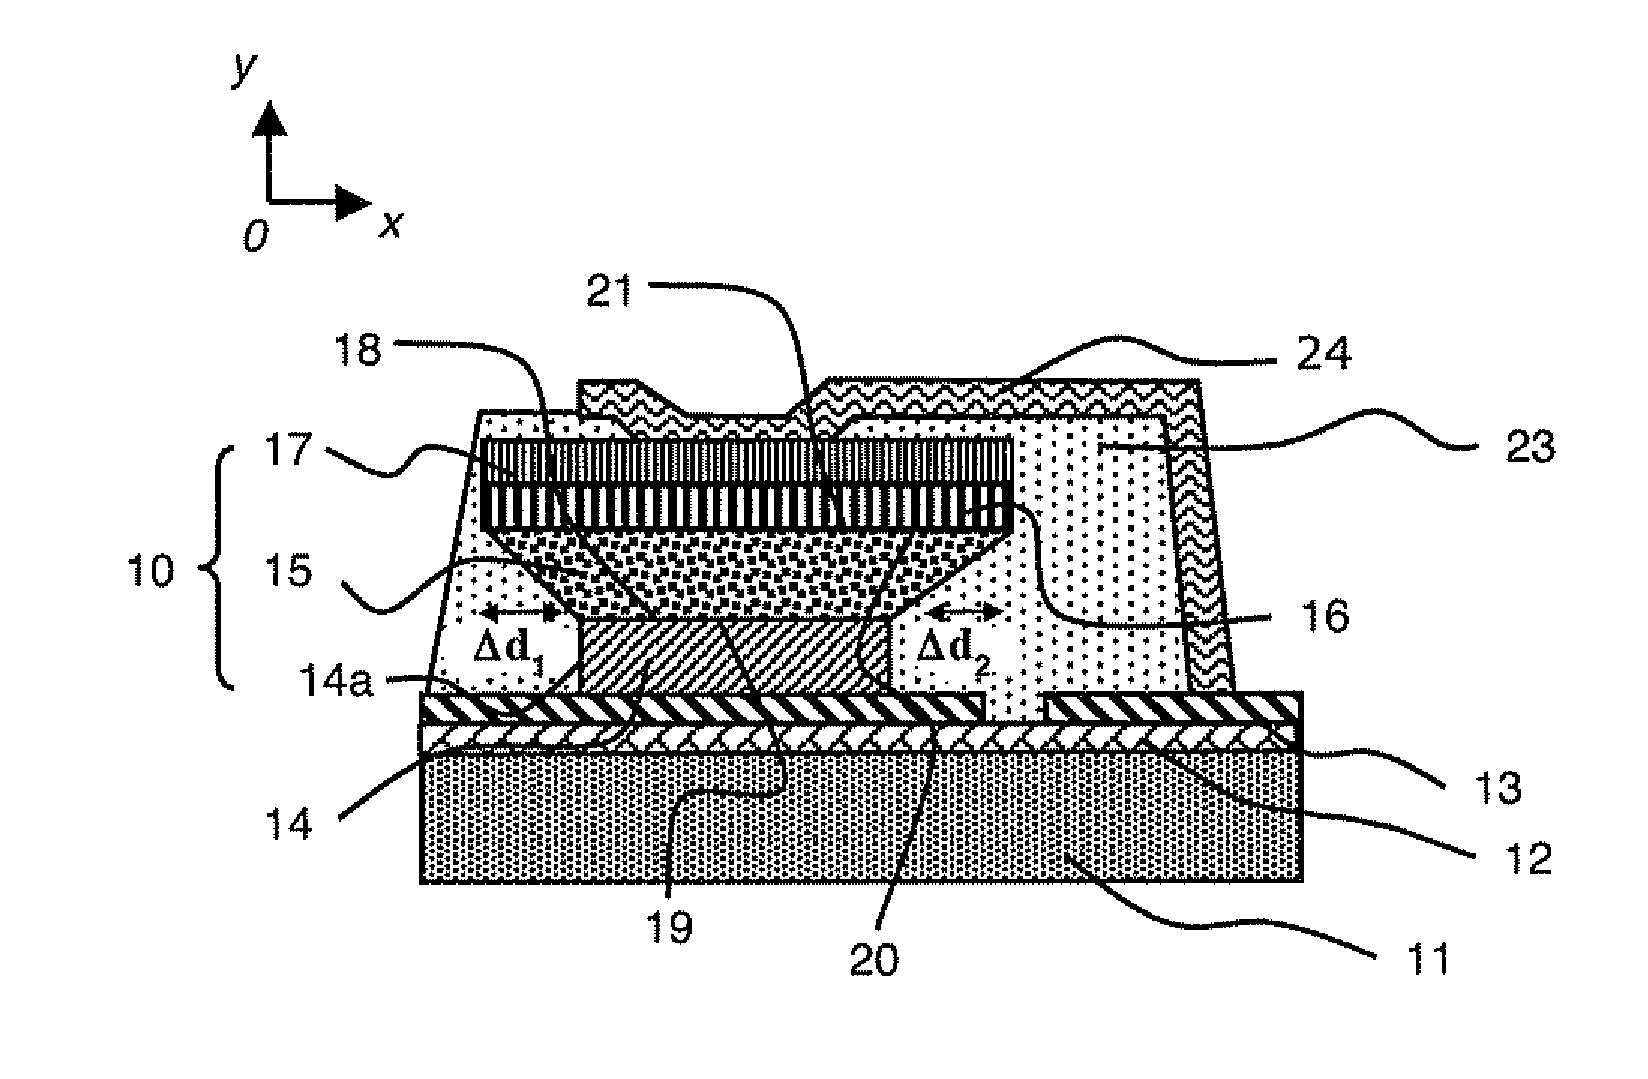 Lithium microbattery and fabrication method thereof